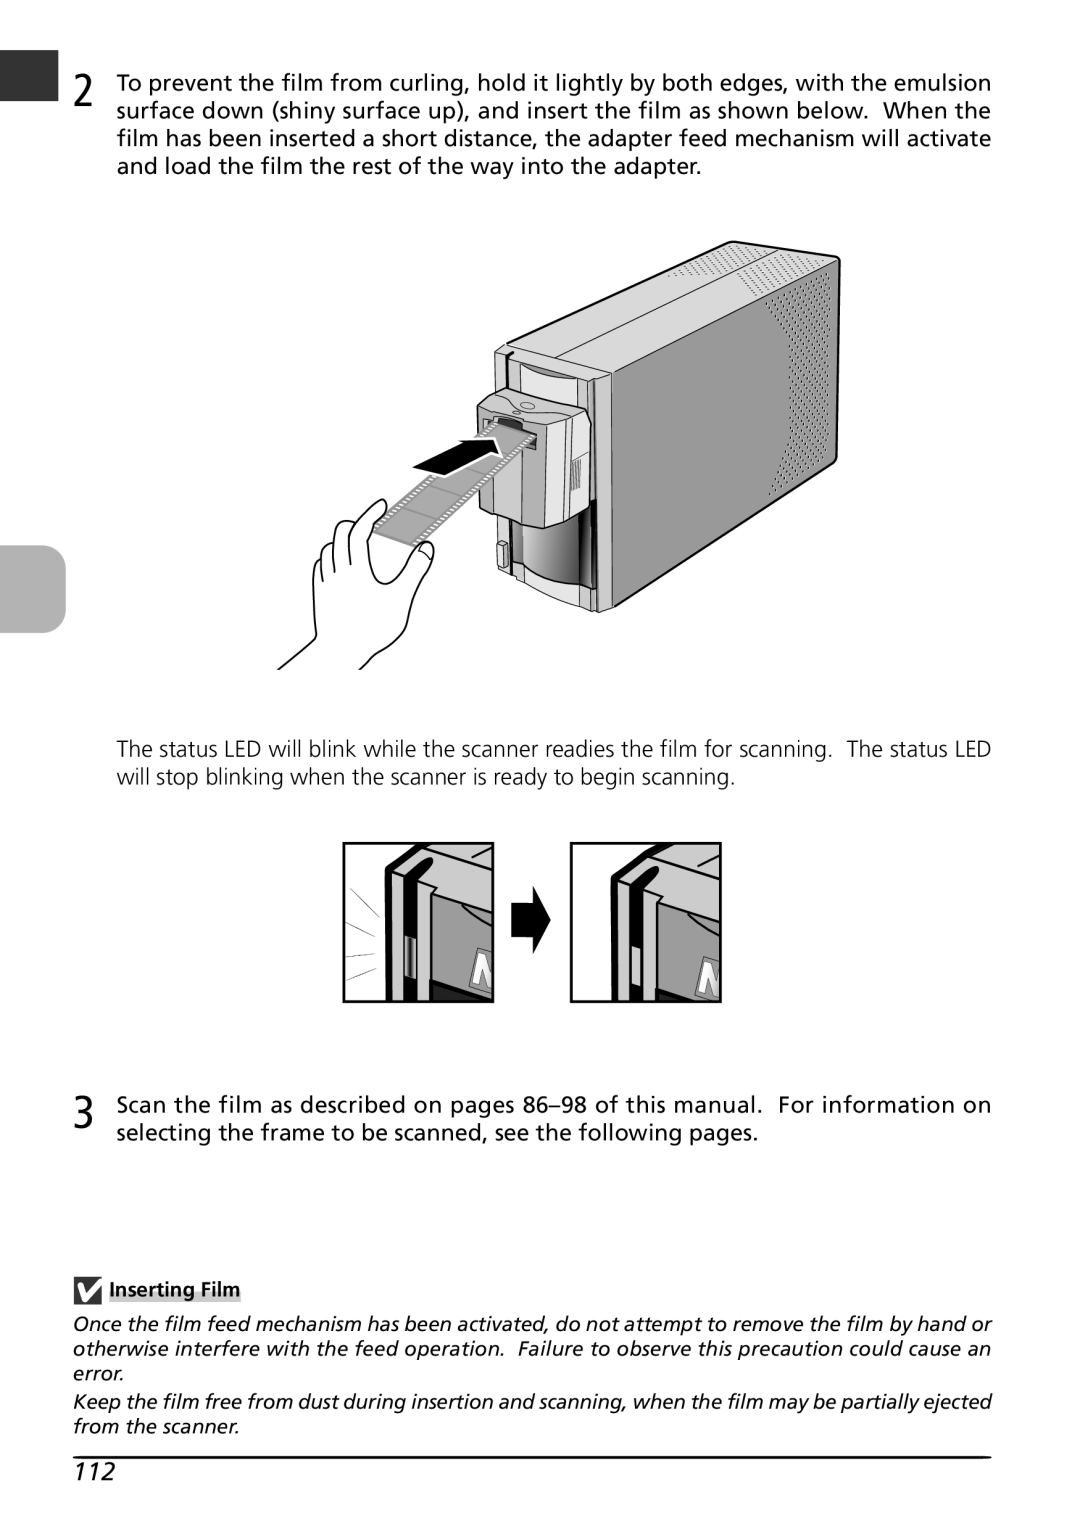 Nikon LS4000 user manual selecting the frame to be scanned, see the following pages 